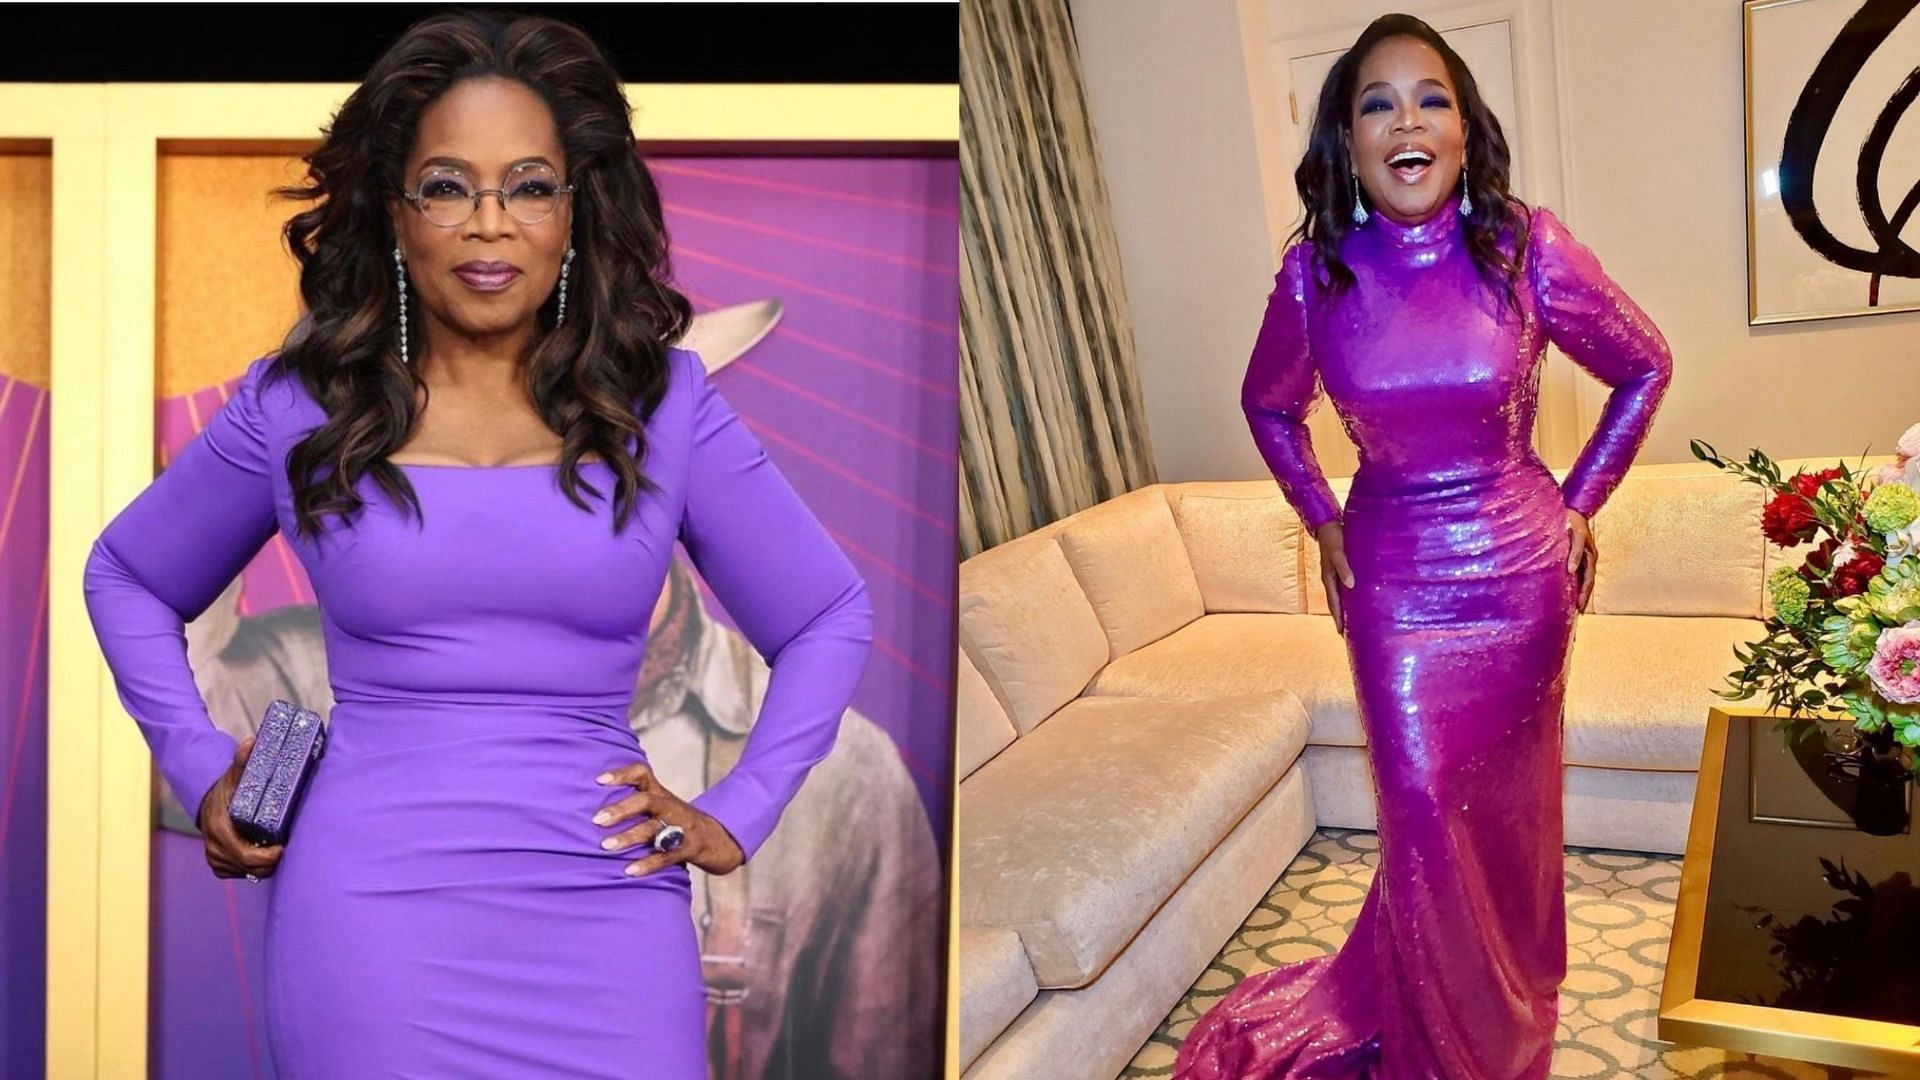 What Did Oprah Winfrey Say About Her Weight Loss Media Mogul Addresses Body Transformation